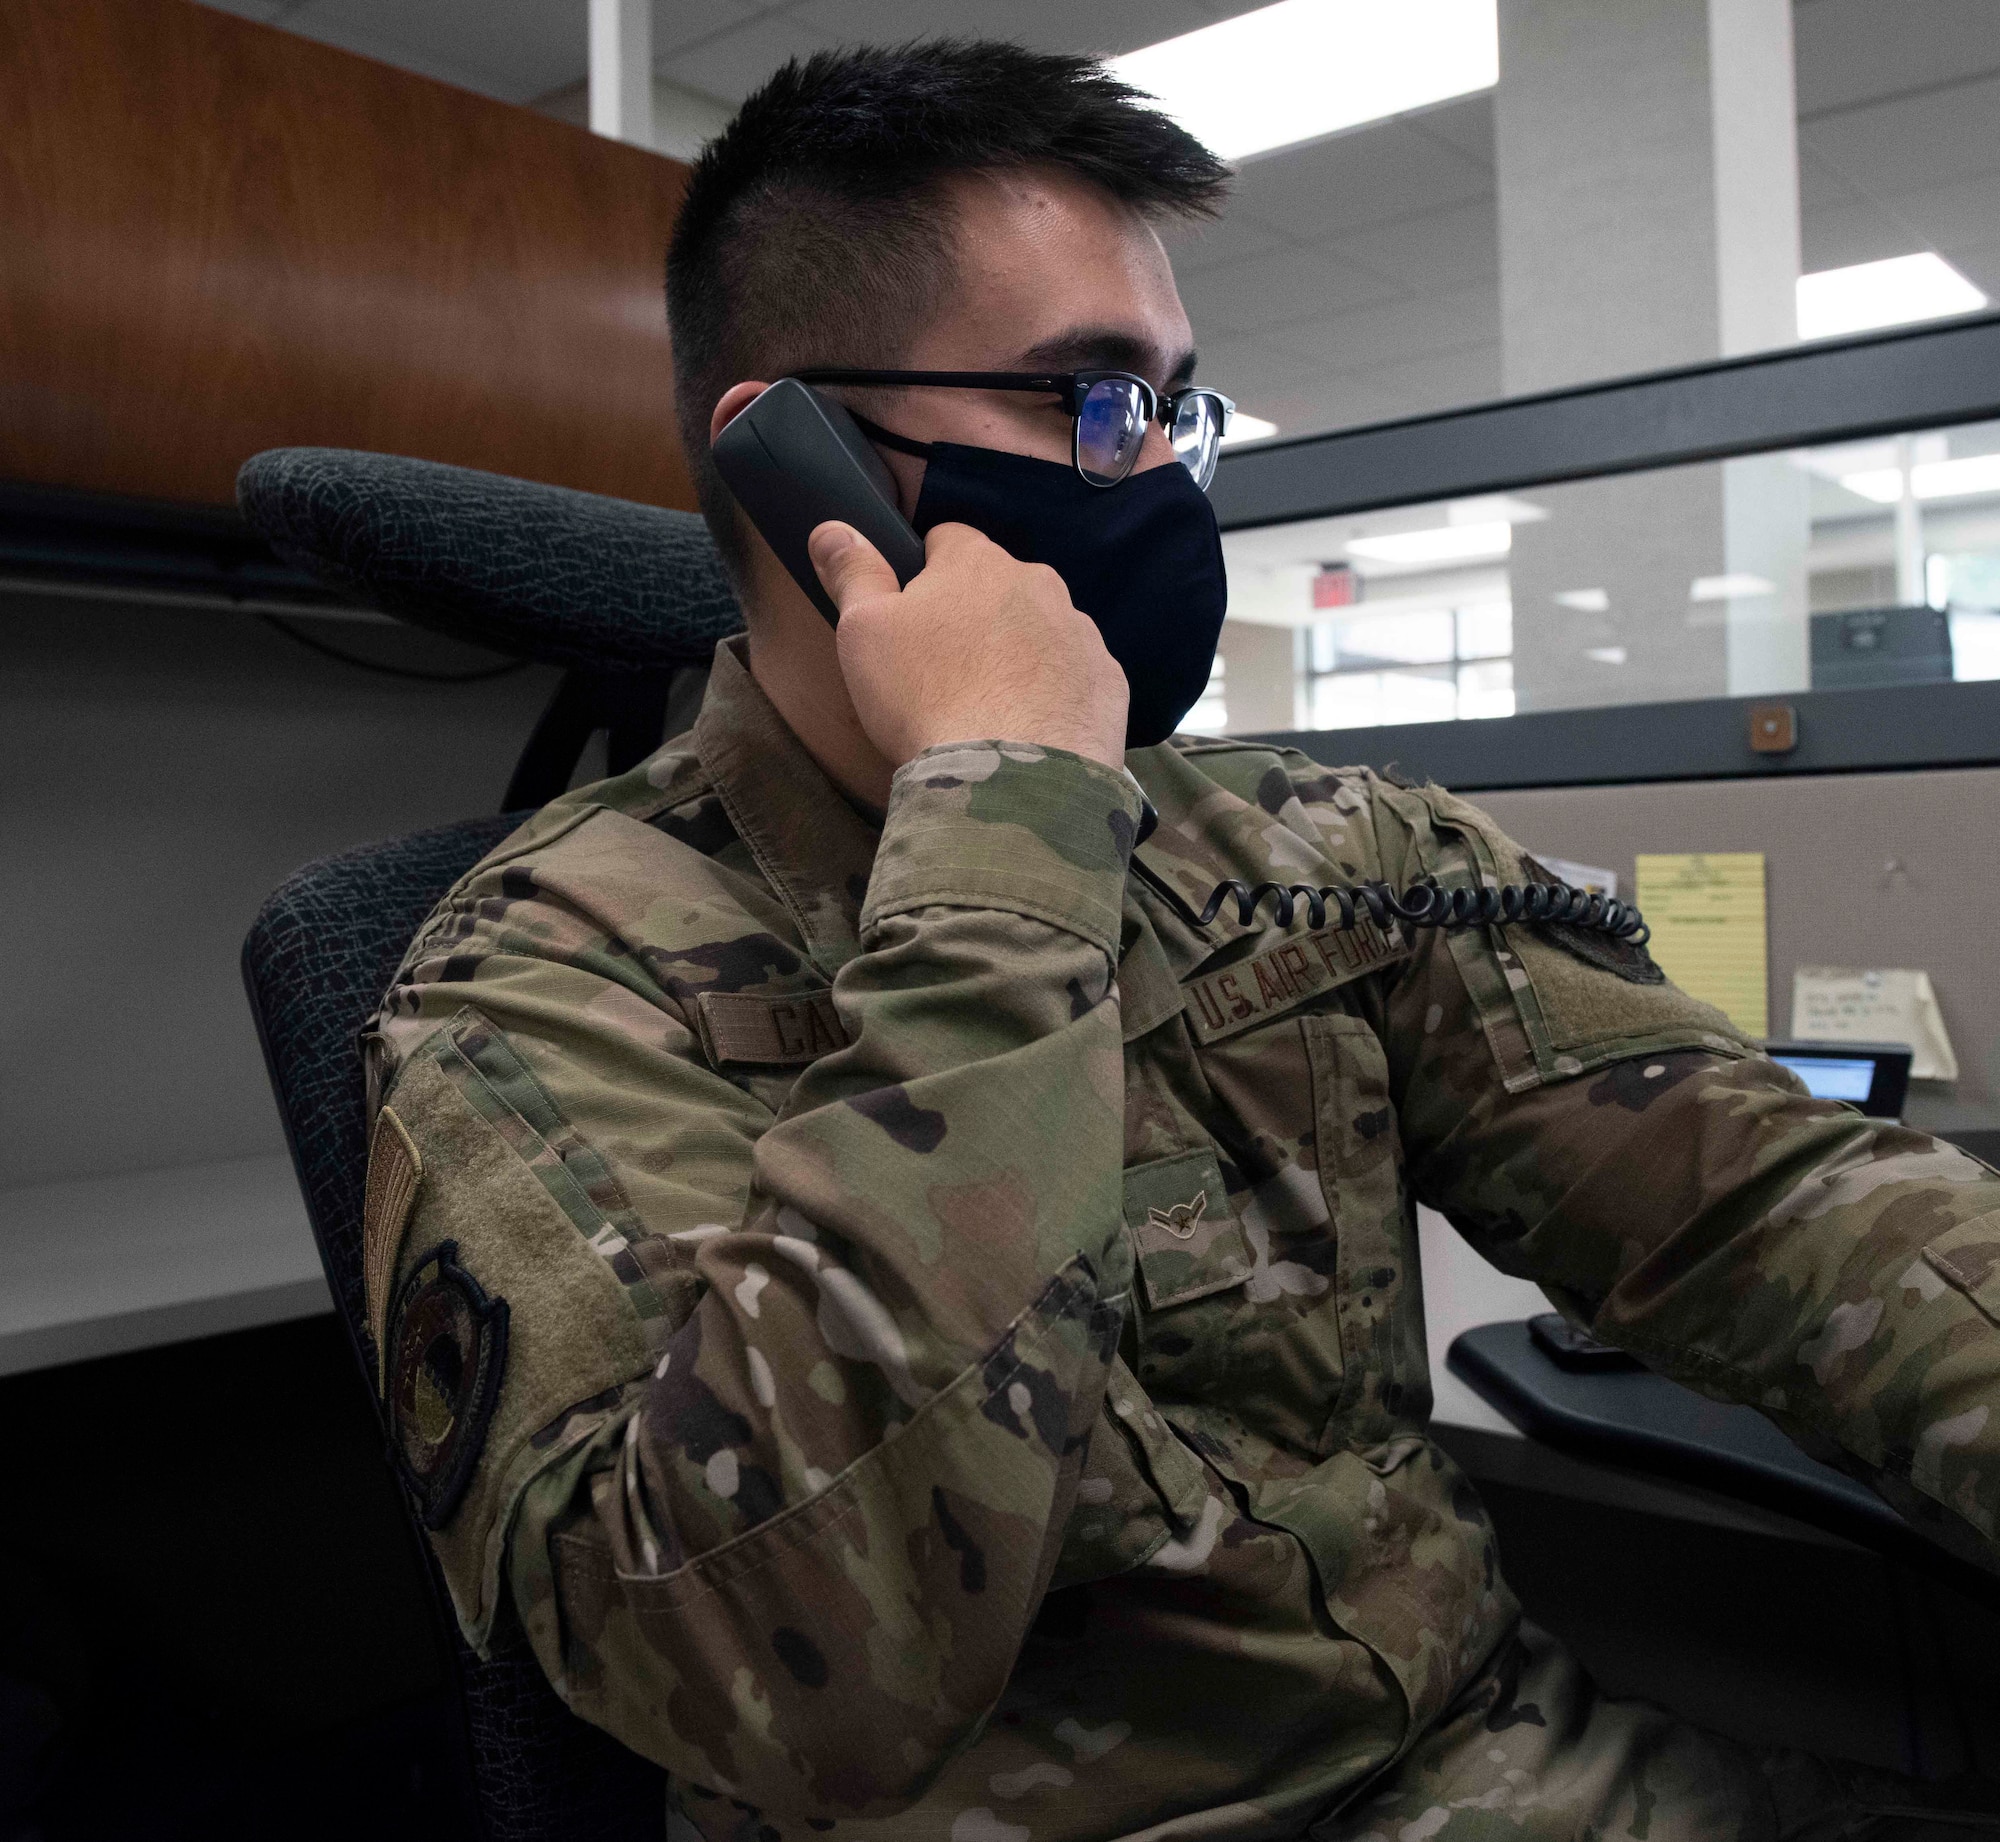 Military member answers phone